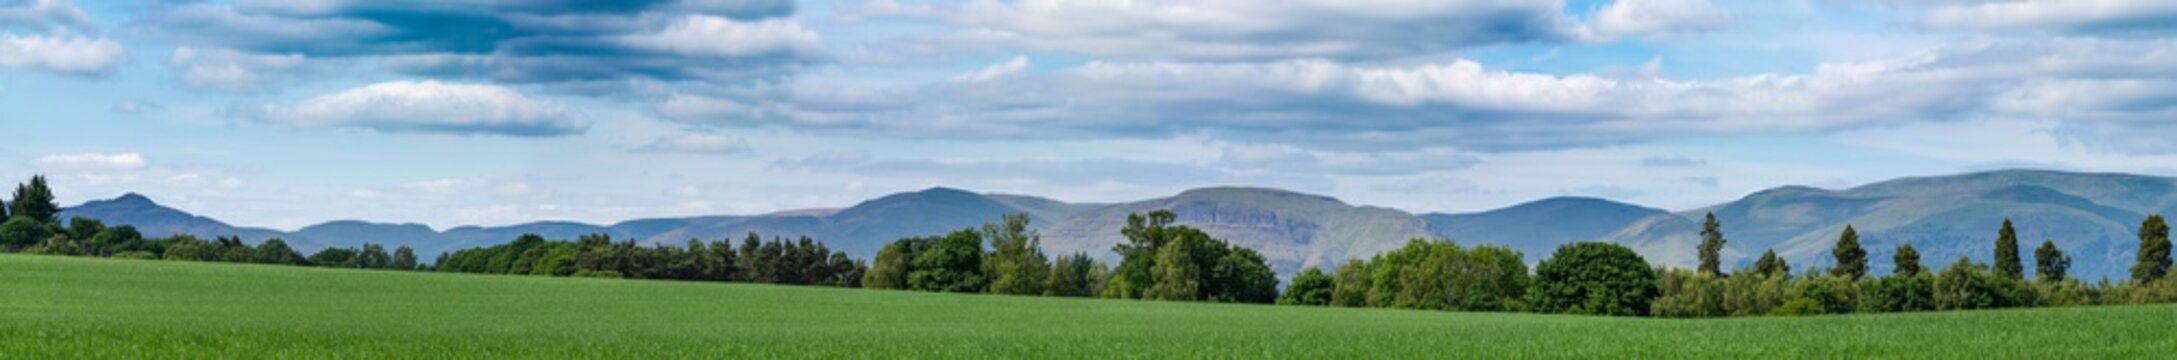 Panoramic landscape of the ochil hills near the city of Stirling, scotland, uk.